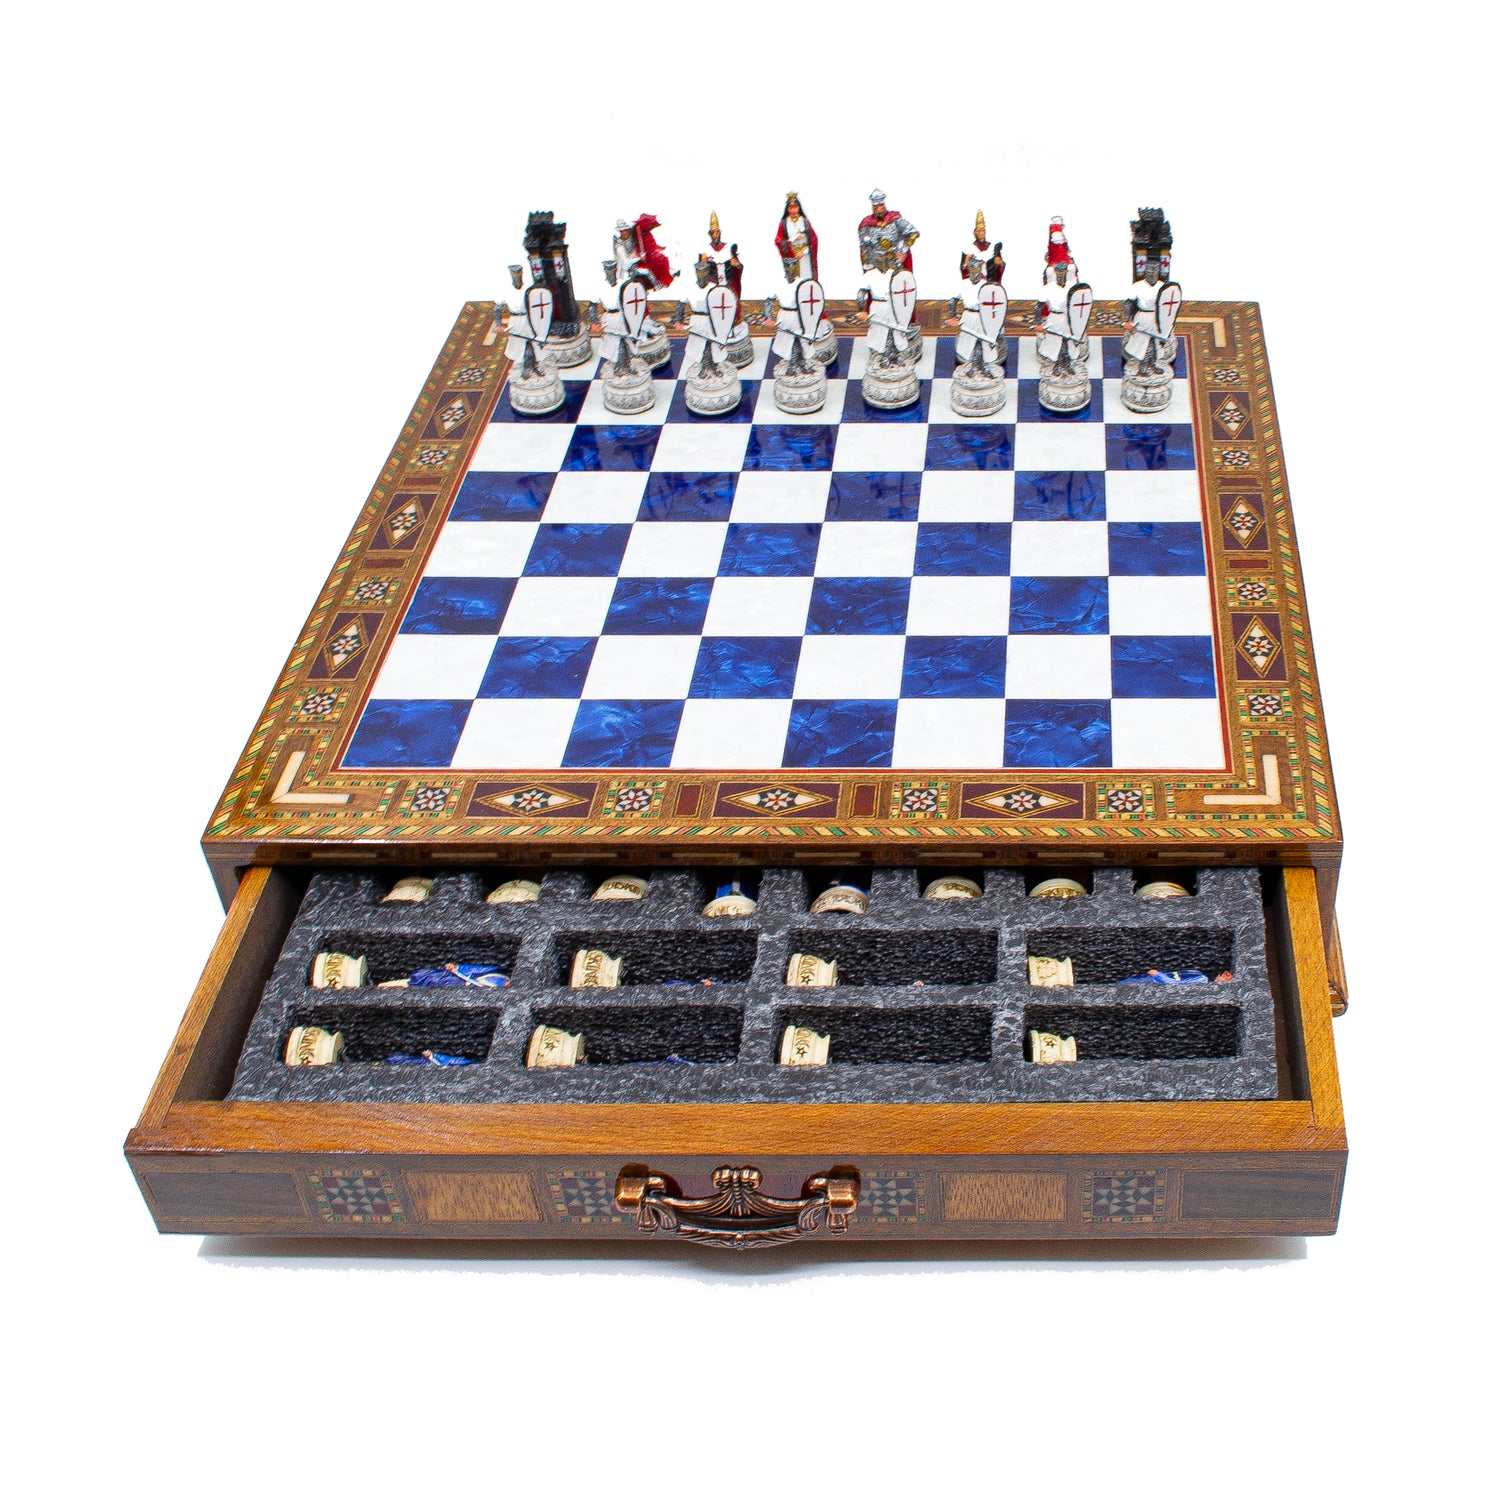 Crusaders vs. Ottoman Chess: Unique with Drawer - Ketohandcraft